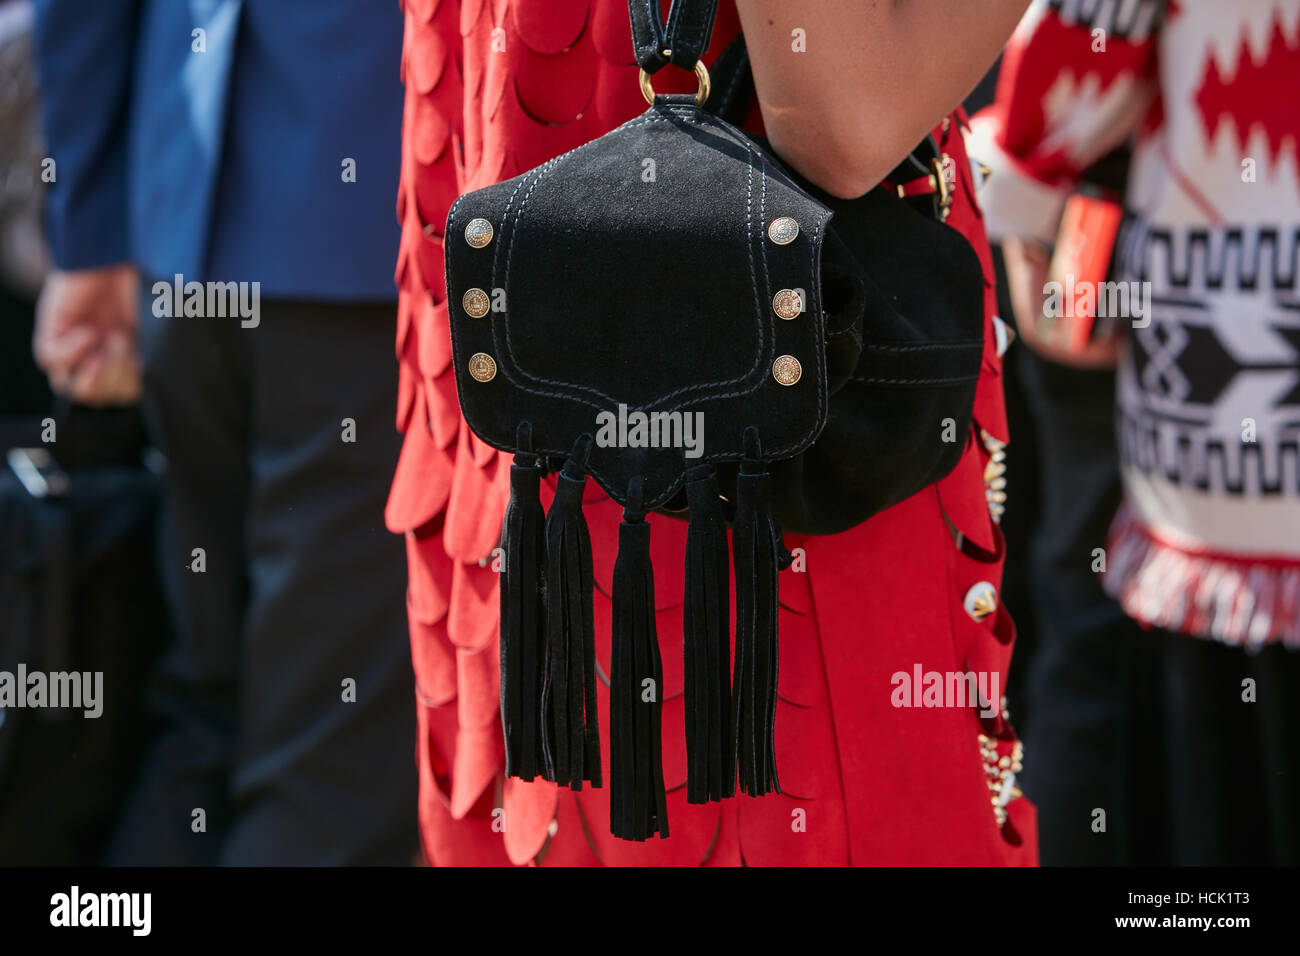 Woman with red dress and V 73 black backpack with fringes before Stella Jean fashion show, Milan Fashion Week street style. Stock Photo